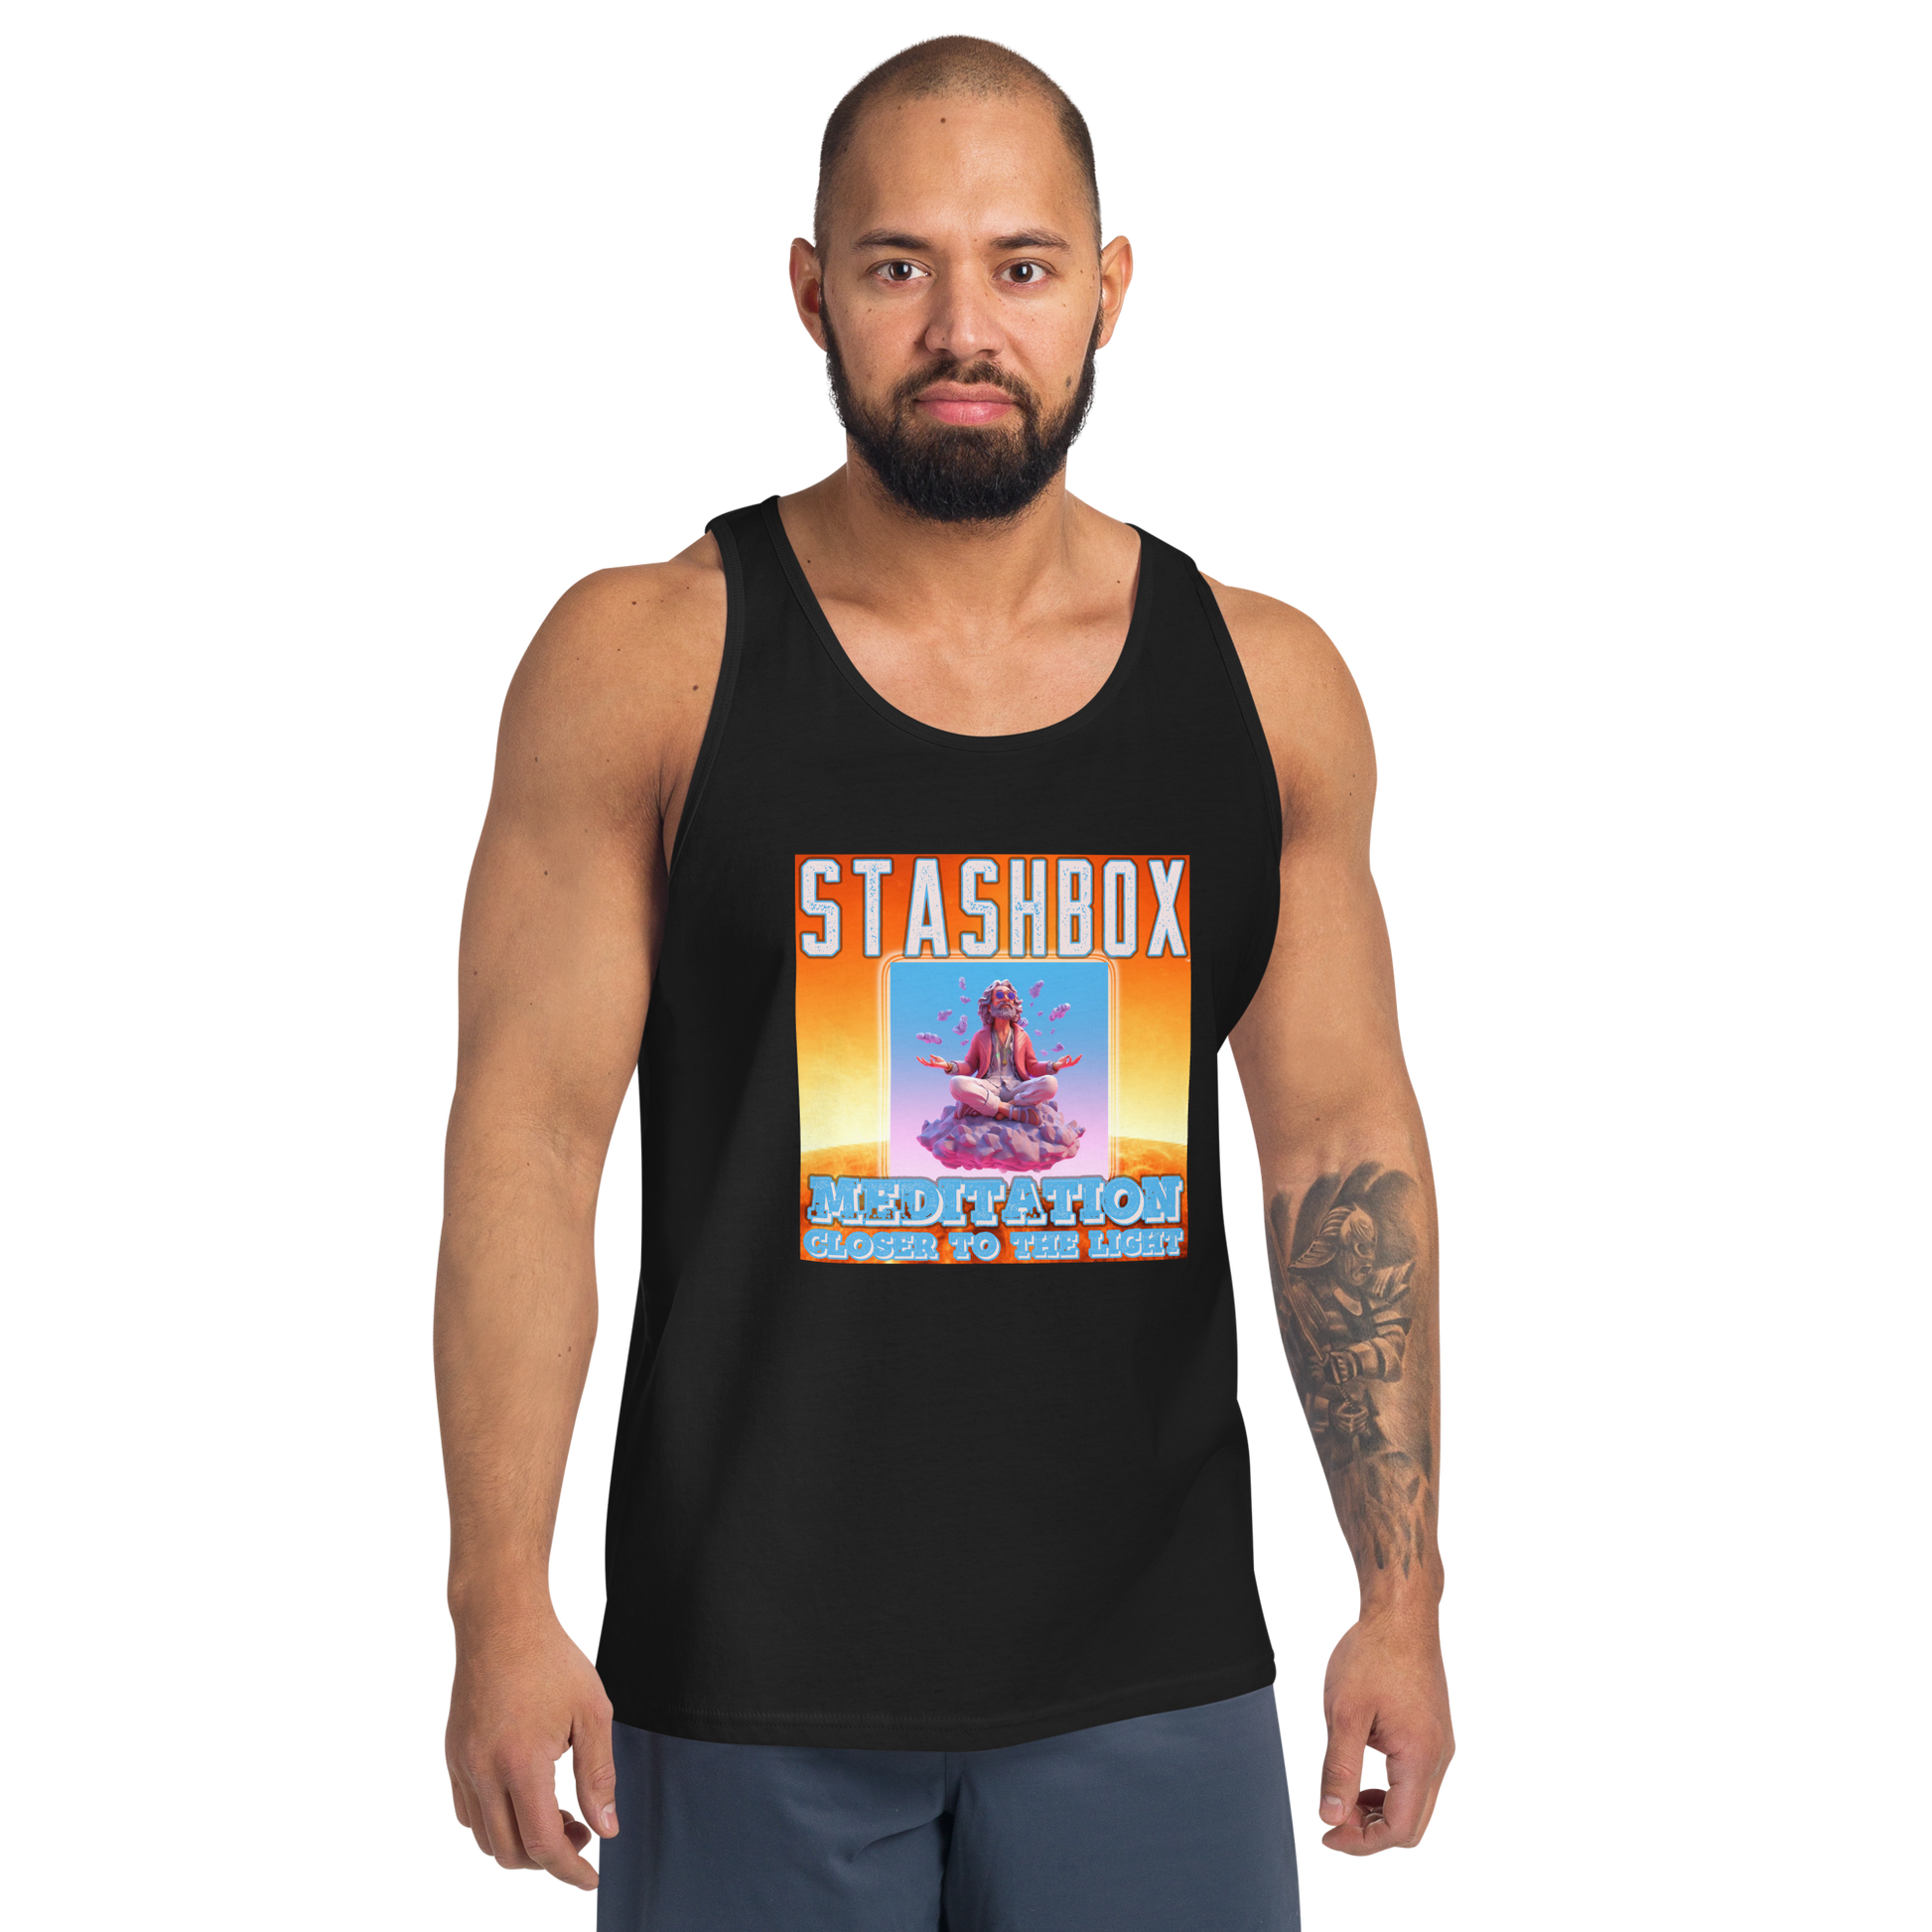 Find tranquility in our Meditation: Closer To the Light Men's Tanktop Shirt, Artwork #003 by Stashbox. Your attire, your path to inner peace, exclusively at Stashbox.ai.